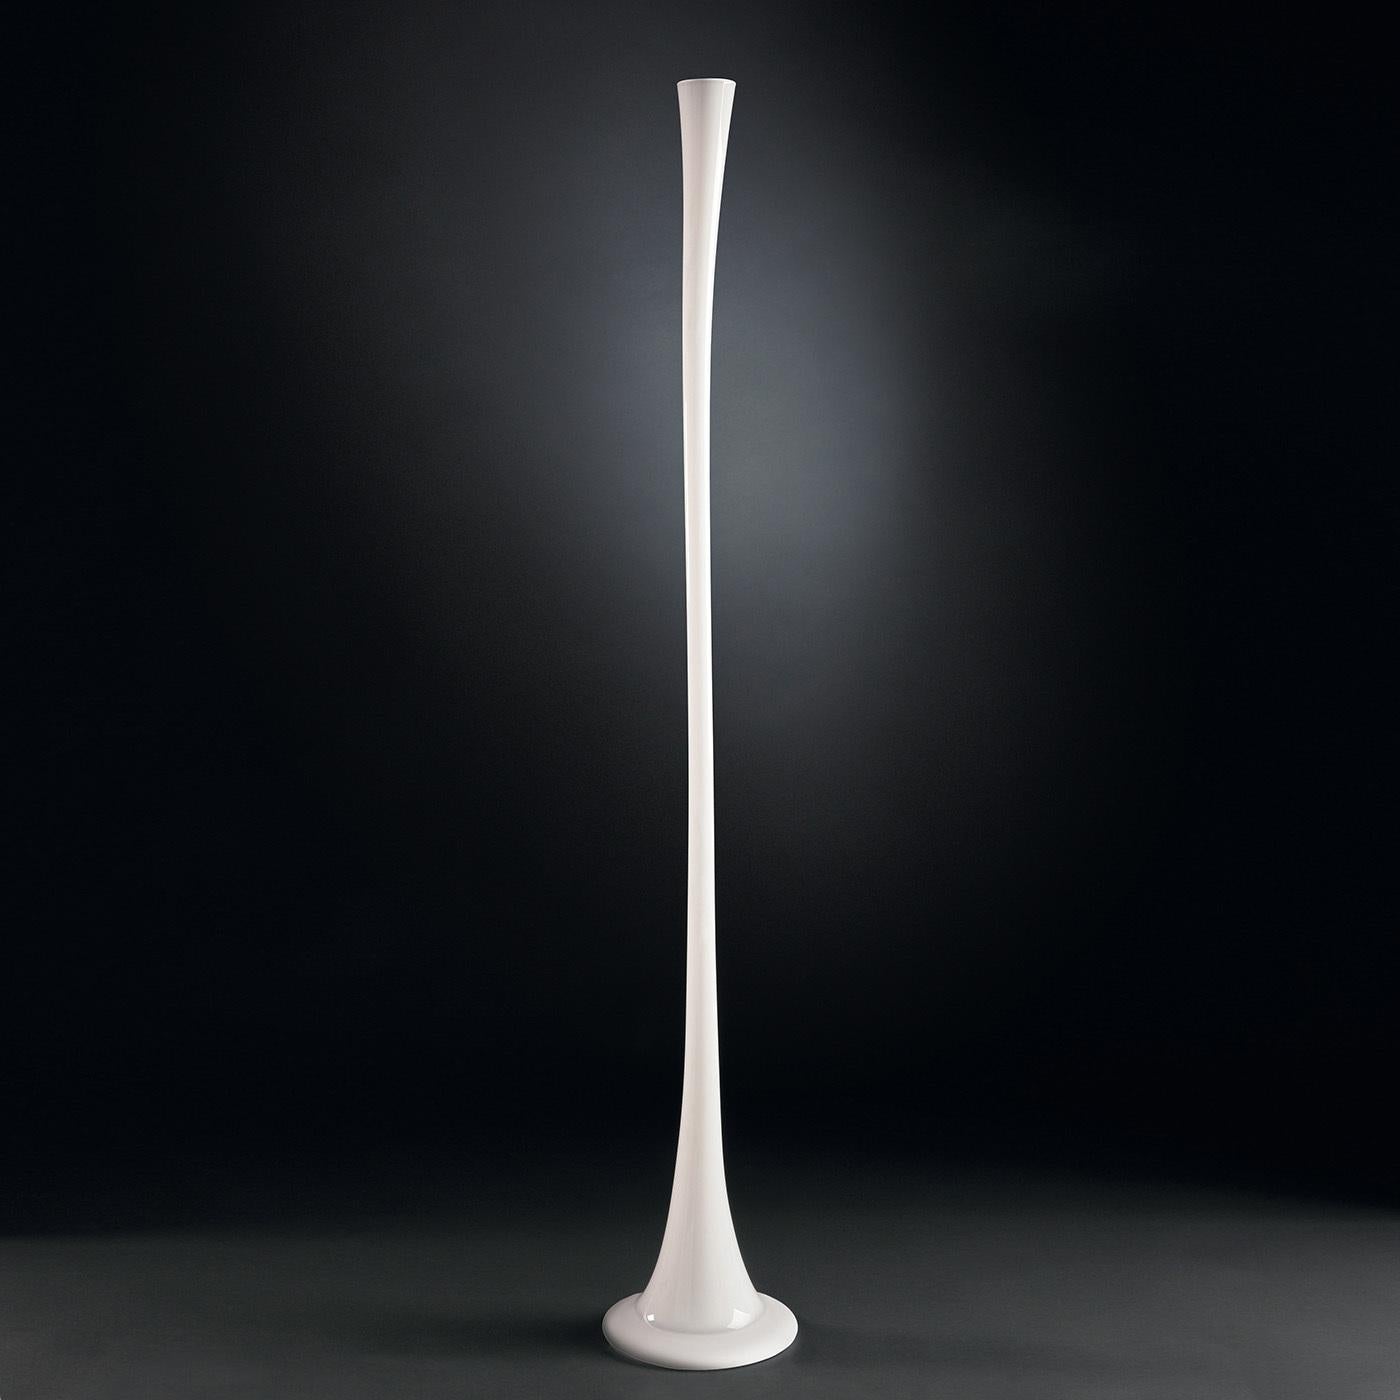 Boasting an elegant total-white look, this stunning vase is a sculptural two-meter tall objet d'art exquisitely handcrafted of glass. Its singular and tapered silhouette resembles that of a delicate spring flower stem and will make a statement in a